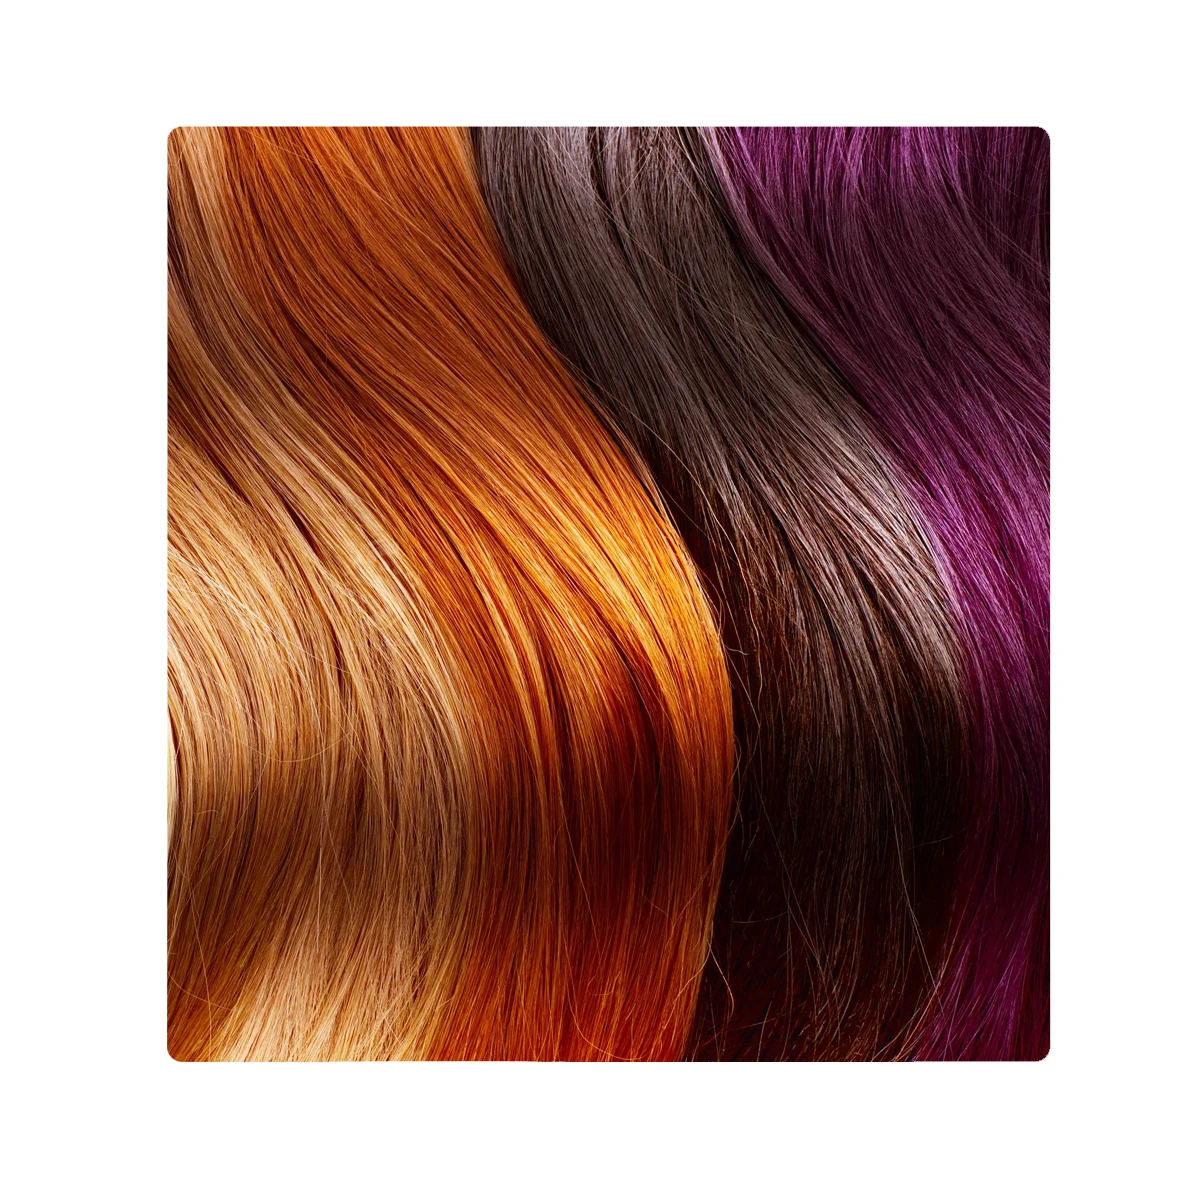 Best Quality 3 Times Refined Herbal Extract Natural Hair Colors  Manufacturer In India - Buy Natural Herbal Hair Dye Color Manufacturers  India,Best Chemical Free Hair Colors In India,Natural Tint Hair Color  Product